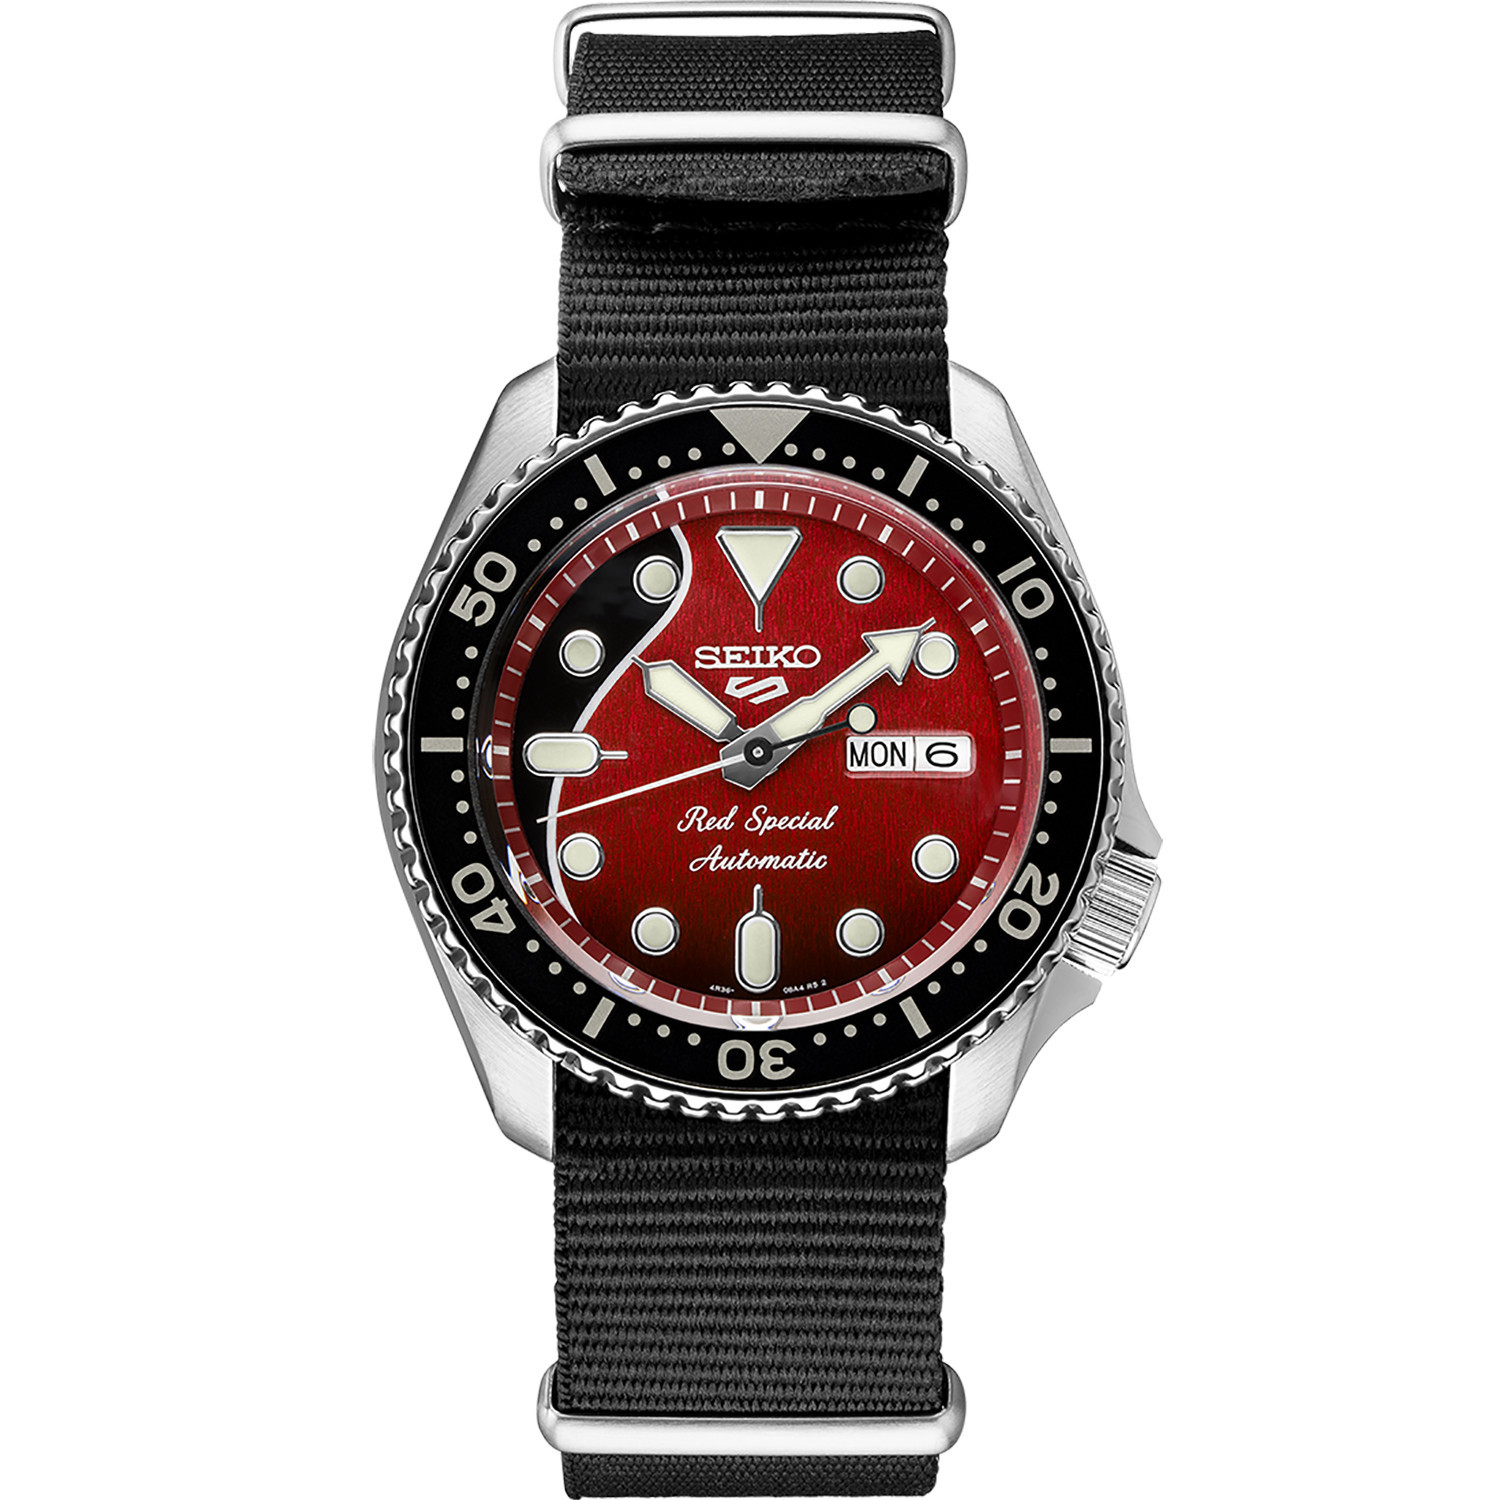 Montre Seiko 5 sports red spécial "Brian May"
Edition limitée